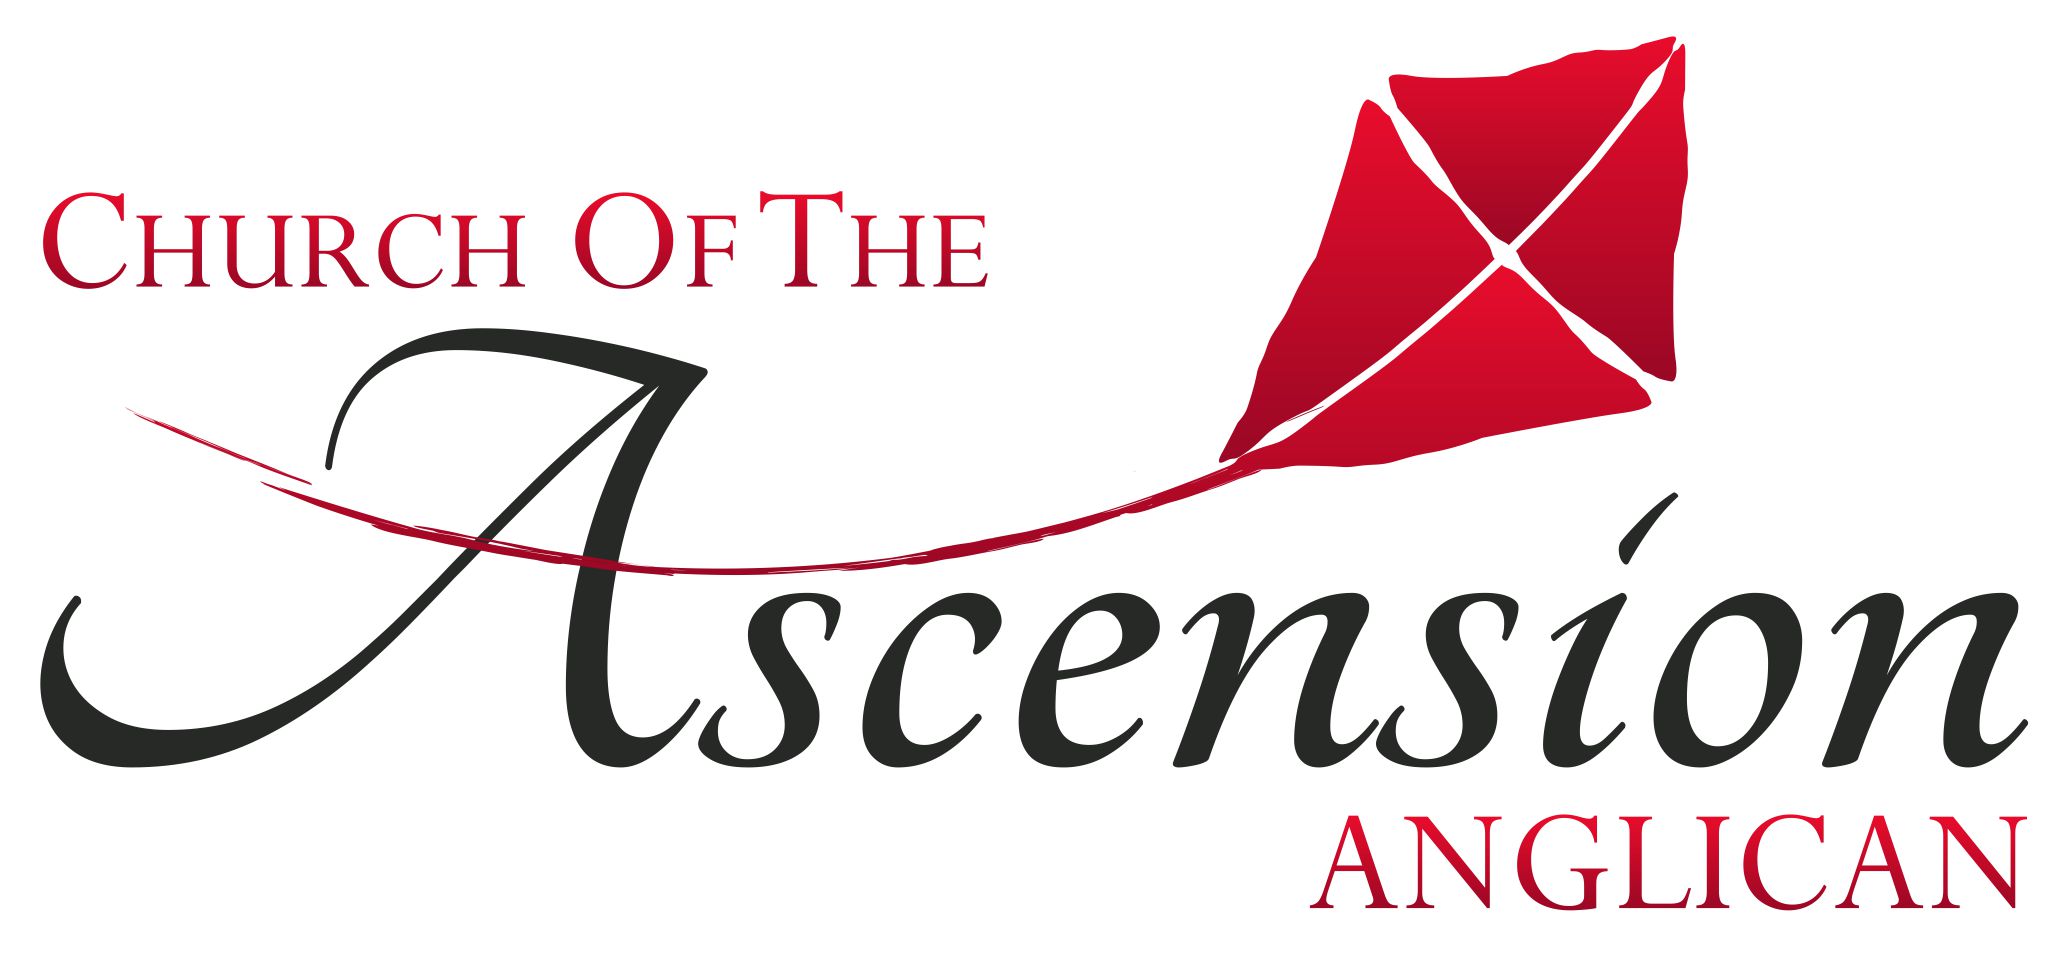 Church of the Ascension logo